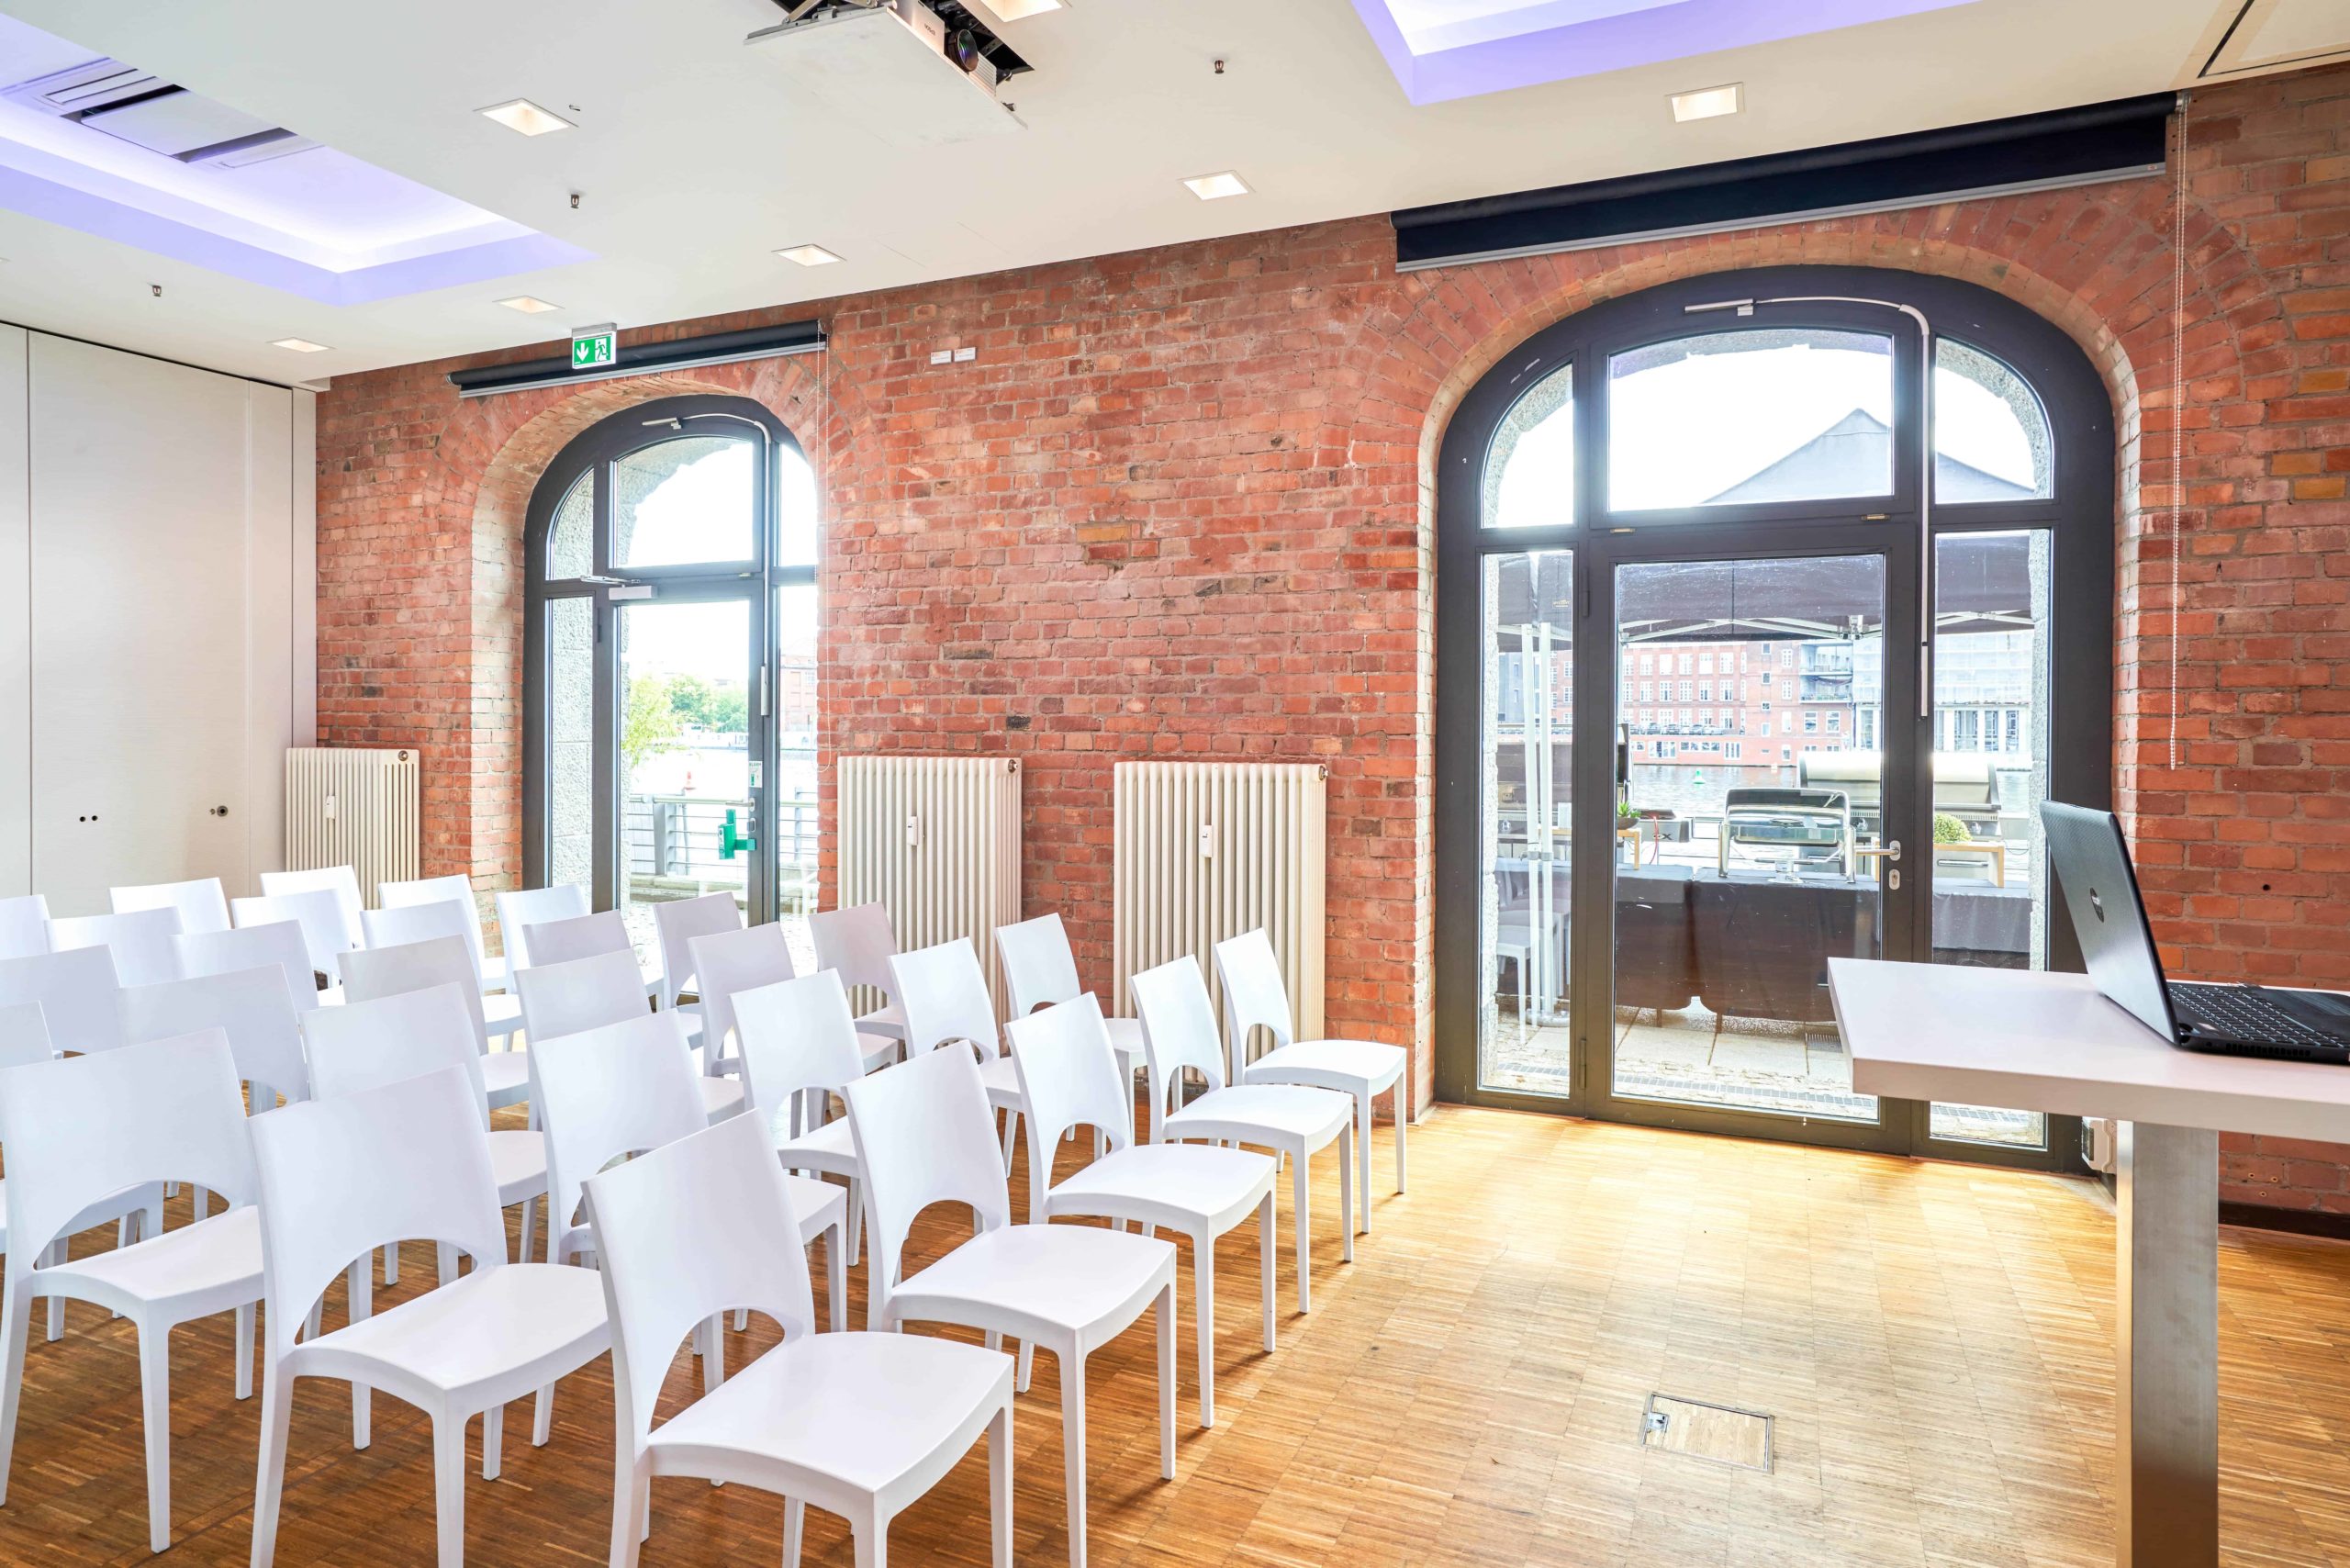 <div><strong>Room Kreuzberg 45 m²</strong><br> up to 20 people<br> <br><span class='text-sm'> ✓ HD projector with HDMI connection<br> ✓ Access to the Spree Terrace<br> ✓ Conference chairs<br><br><strong></span>450€ room rental</strong><br><span class='text-sm'>plus additional costs<br></span></div>